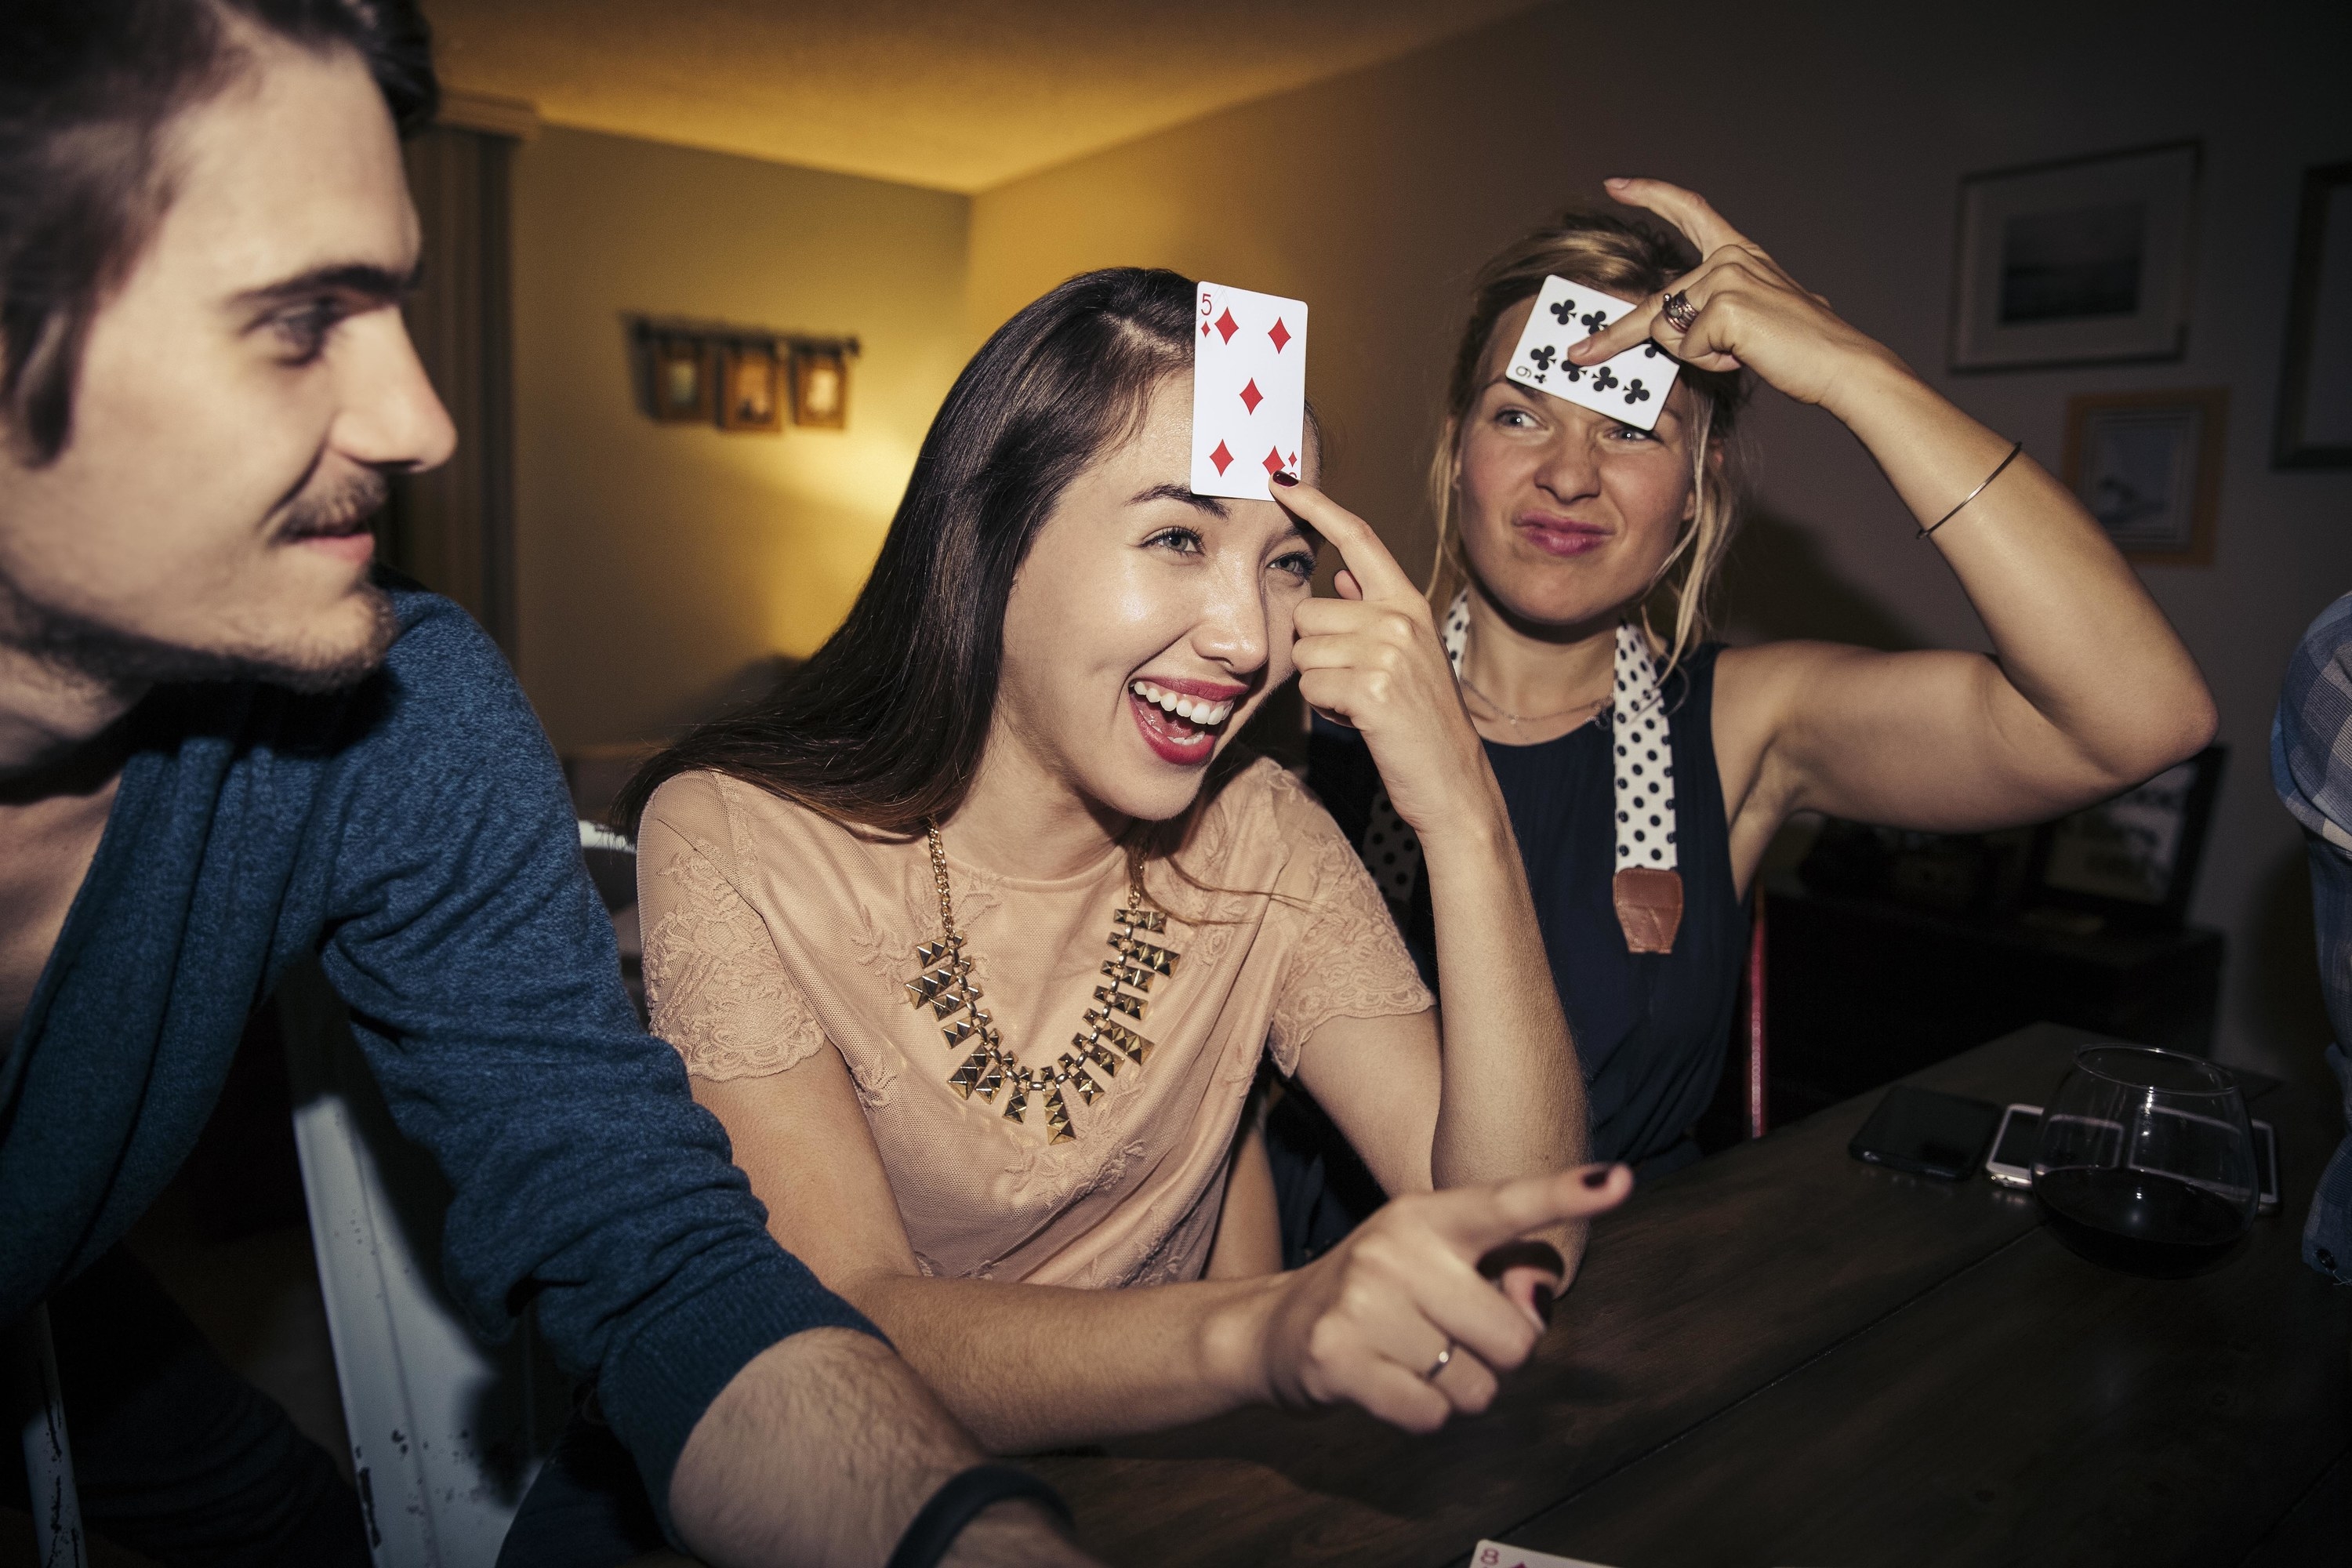 A man sitting next to two women who are holing up cards to their foreheads